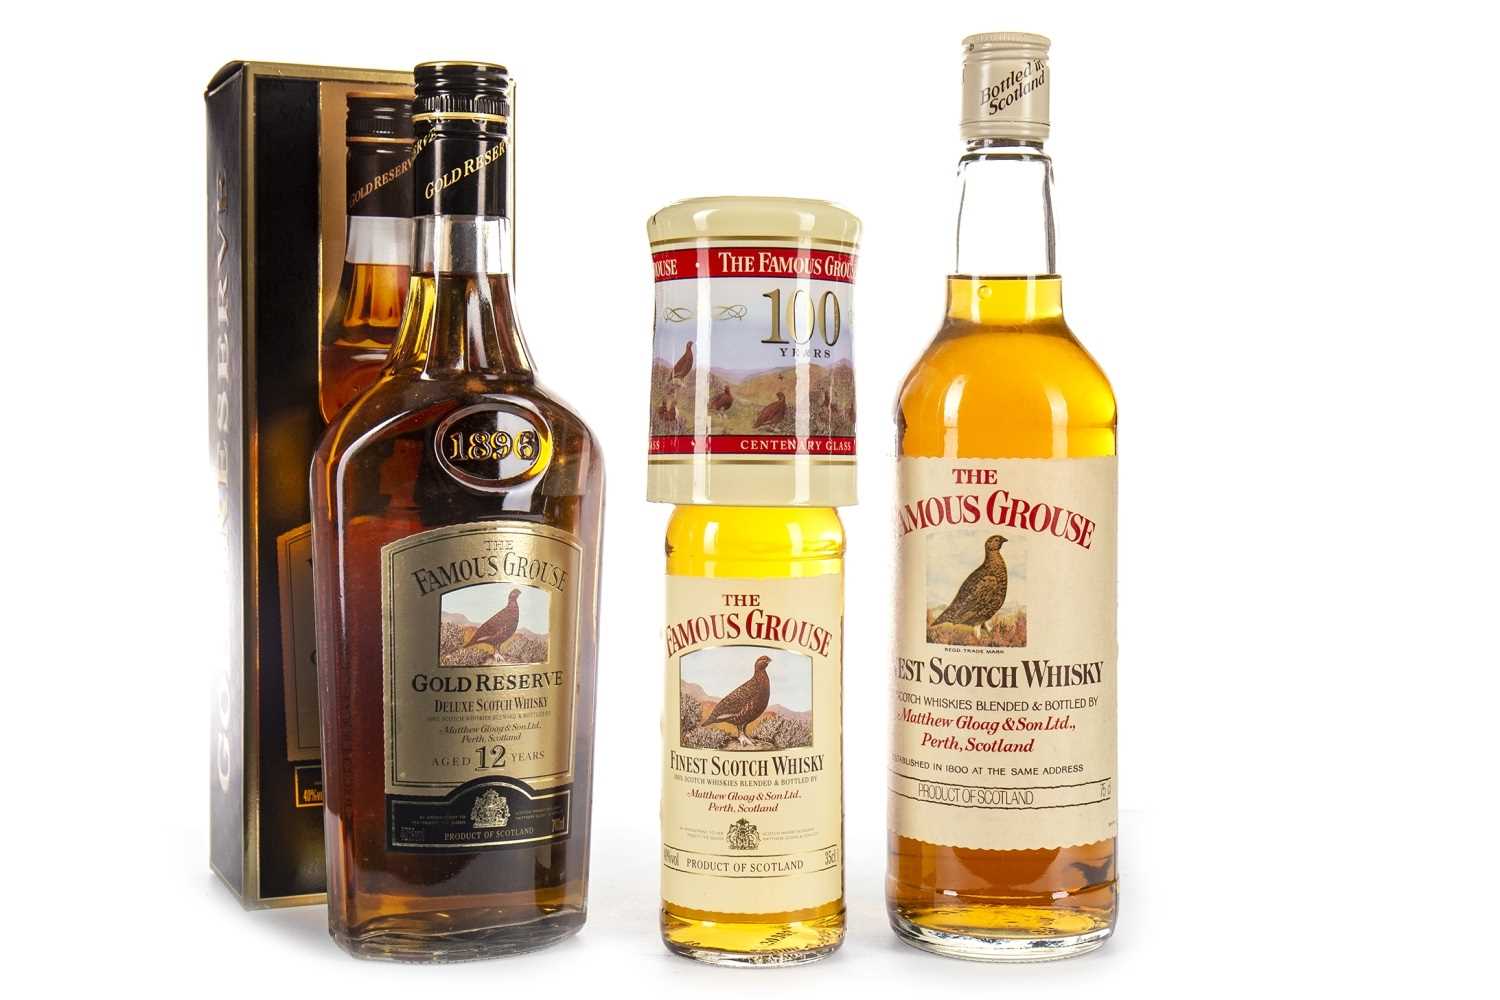 Lot 442 - FAMOUS GROUSE GOLD RESERVE AGED 12 YEARS, AND FAMOUS GROUSE FINEST 75CL & 35CL